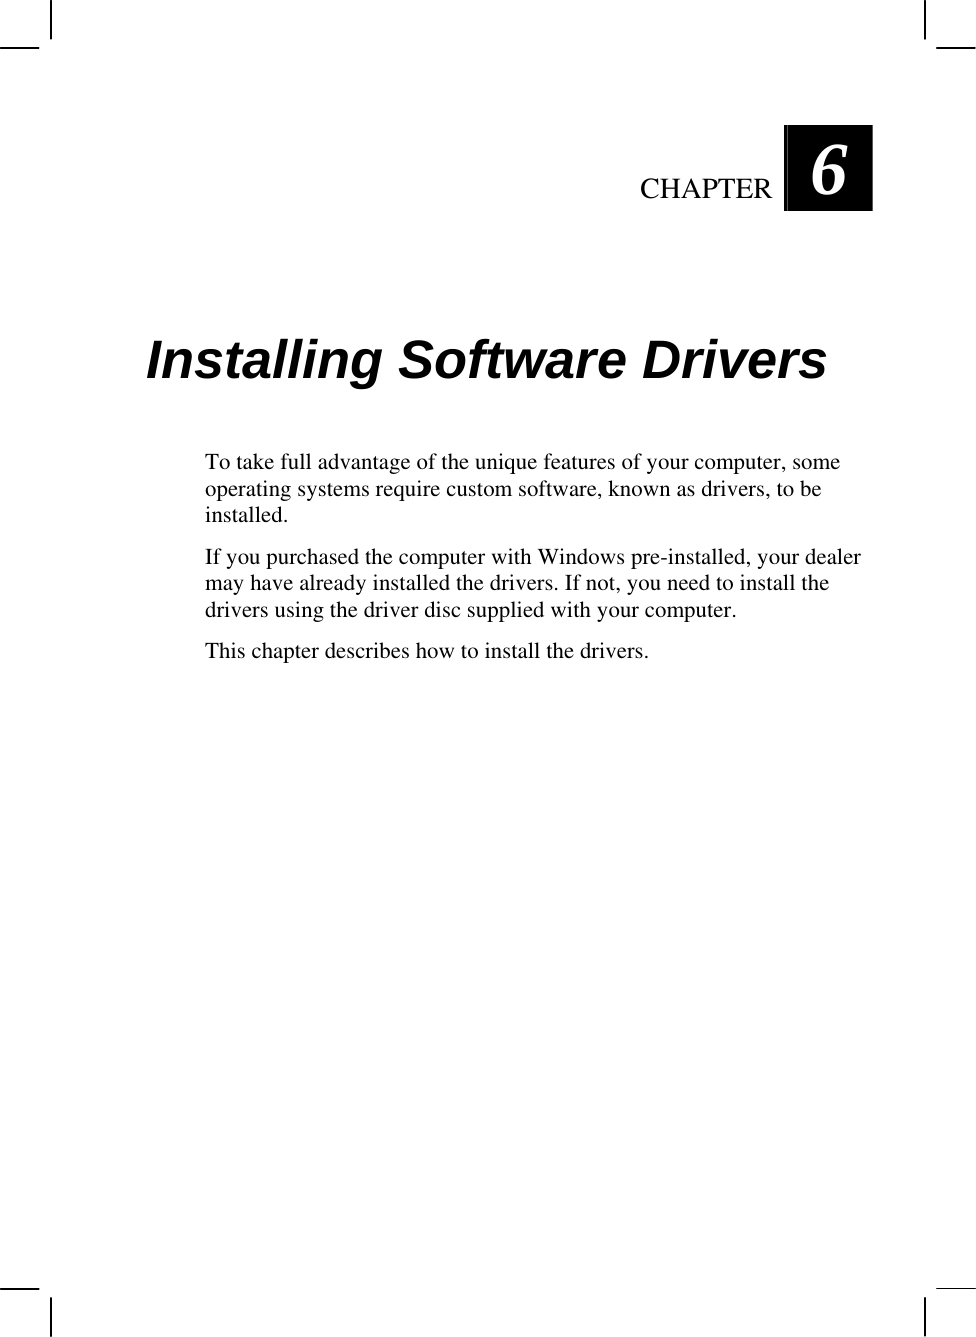  CHAPTER  6 Installing Software Drivers To take full advantage of the unique features of your computer, some operating systems require custom software, known as drivers, to be installed. If you purchased the computer with Windows pre-installed, your dealer may have already installed the drivers. If not, you need to install the drivers using the driver disc supplied with your computer. This chapter describes how to install the drivers.    